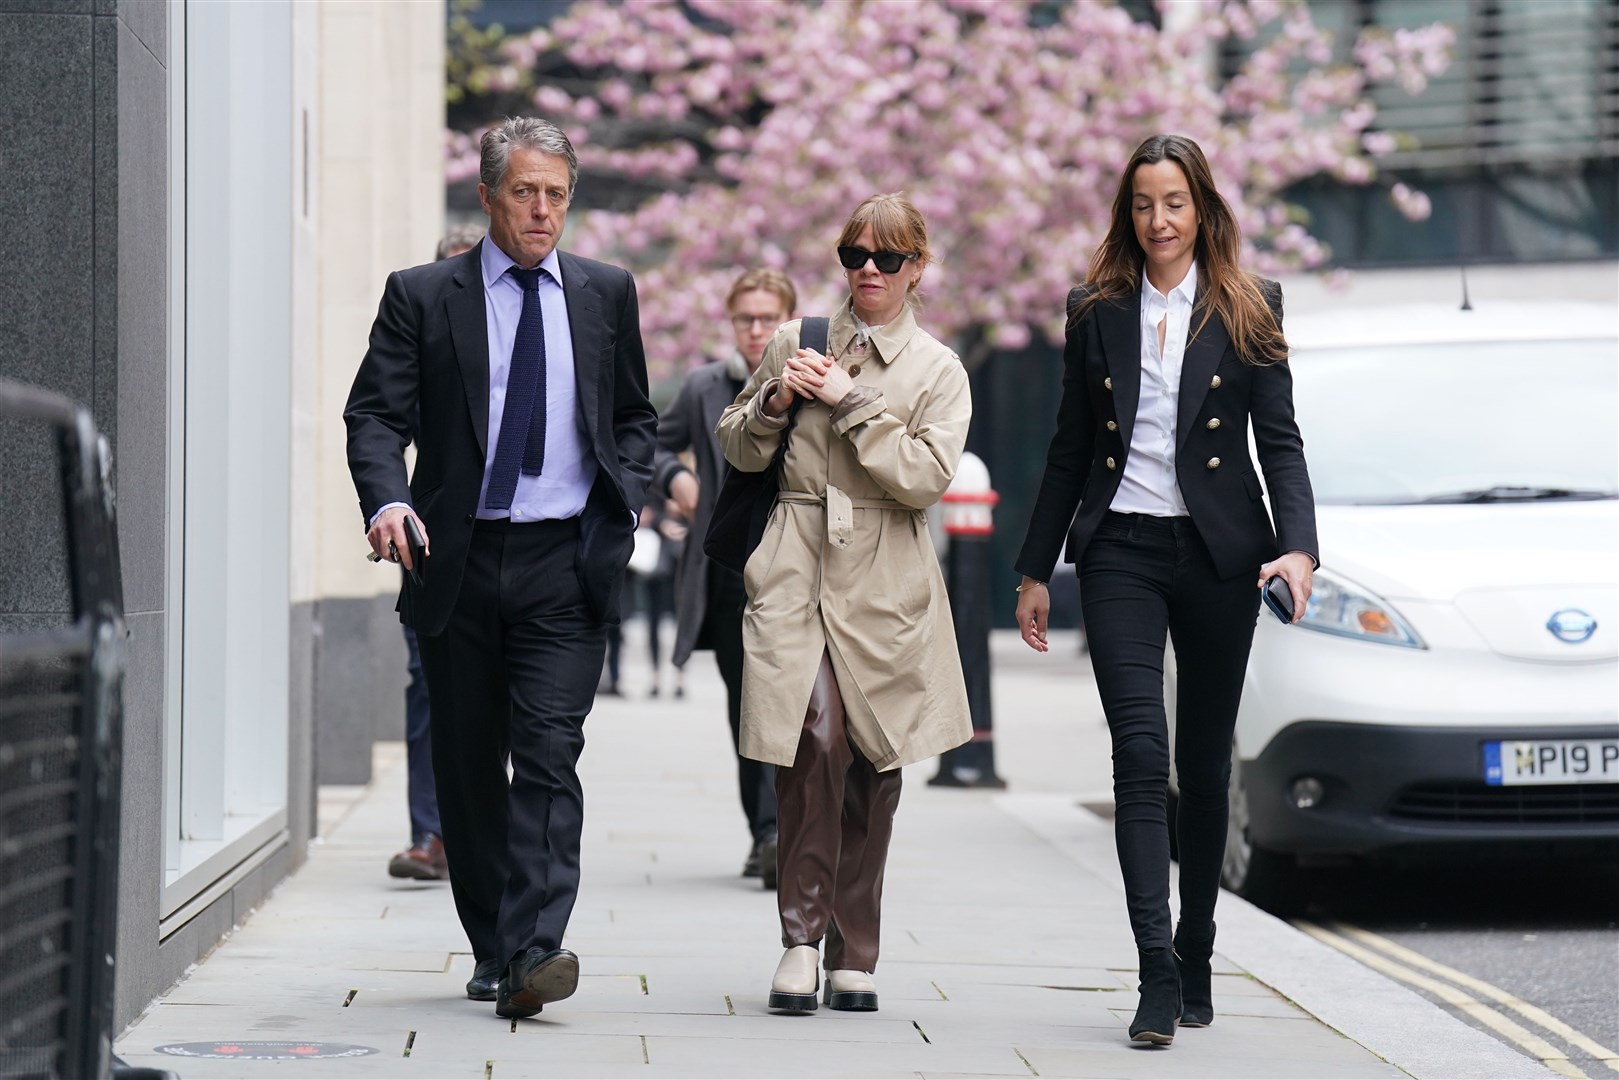 Hugh Grant is a prominent campaigner on press ethics (James Manning/PA)